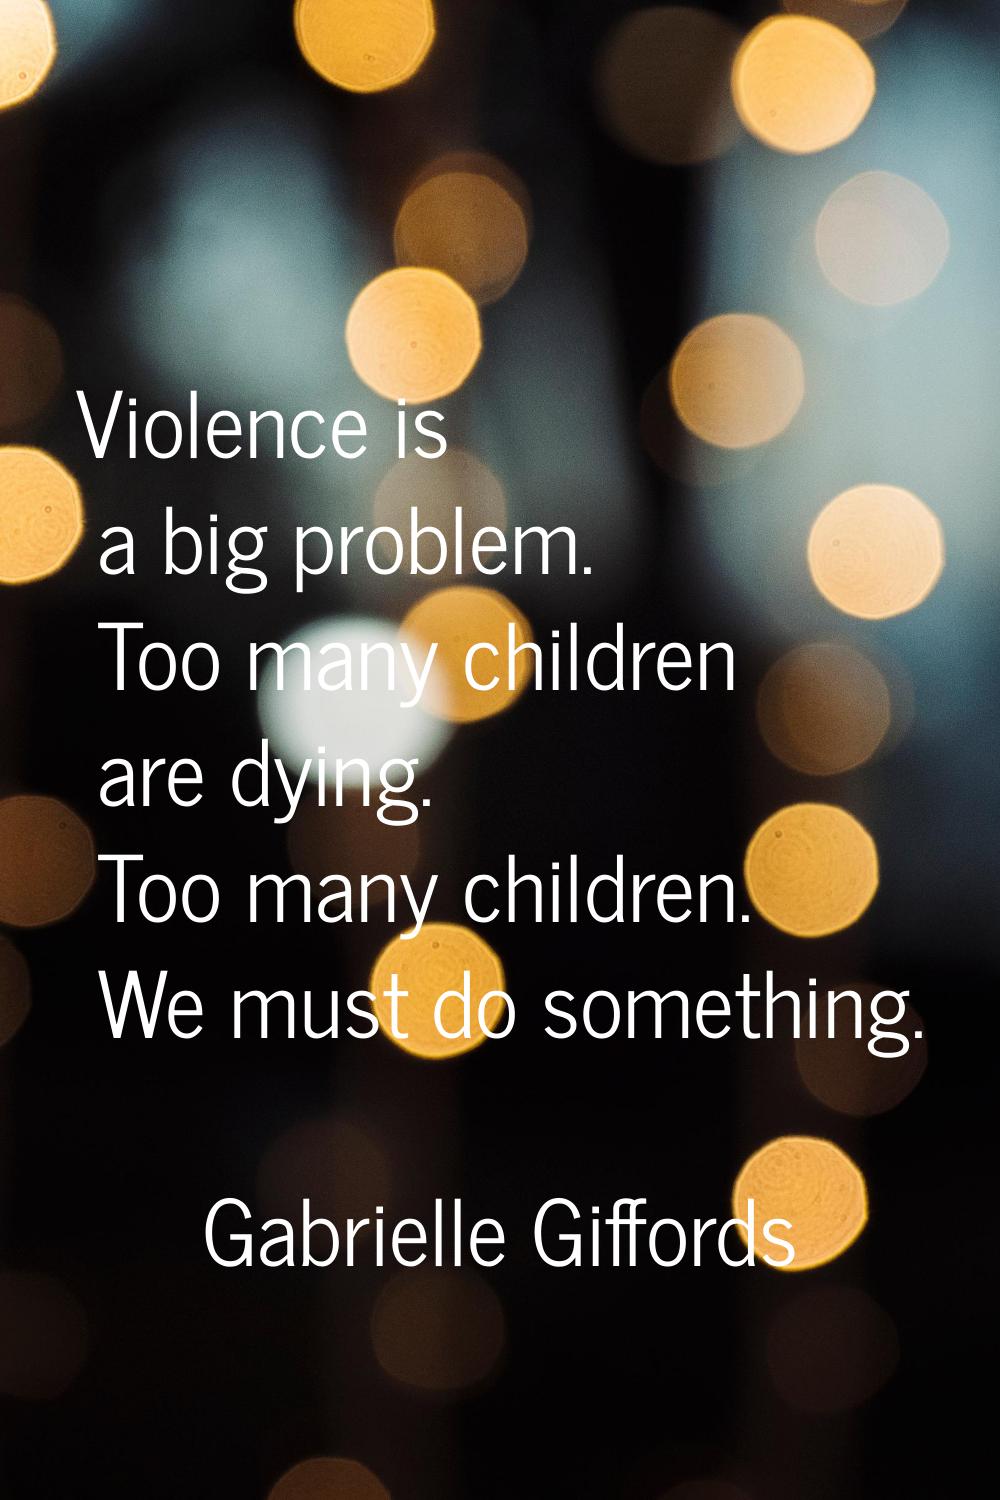 Violence is a big problem. Too many children are dying. Too many children. We must do something.